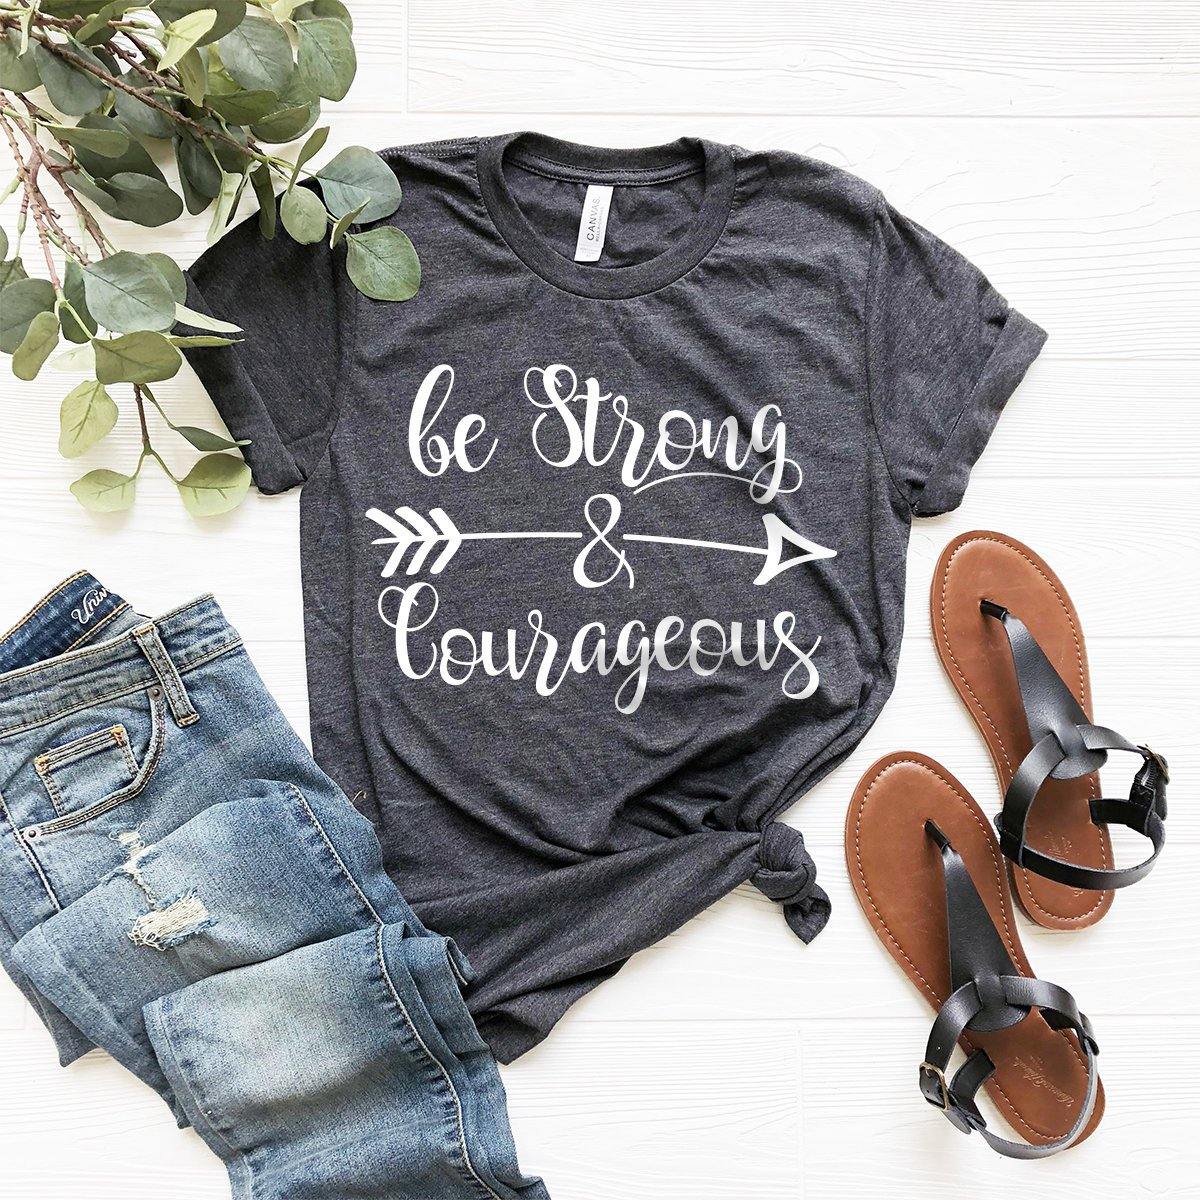 Christian T Shirt, Faith Shirt, Religious Tee, Joshua 19 Shirt, Bible Verse T-Shirt, Shirt For Christian Women, Be Strong And Courageous Tee - Fastdeliverytees.com